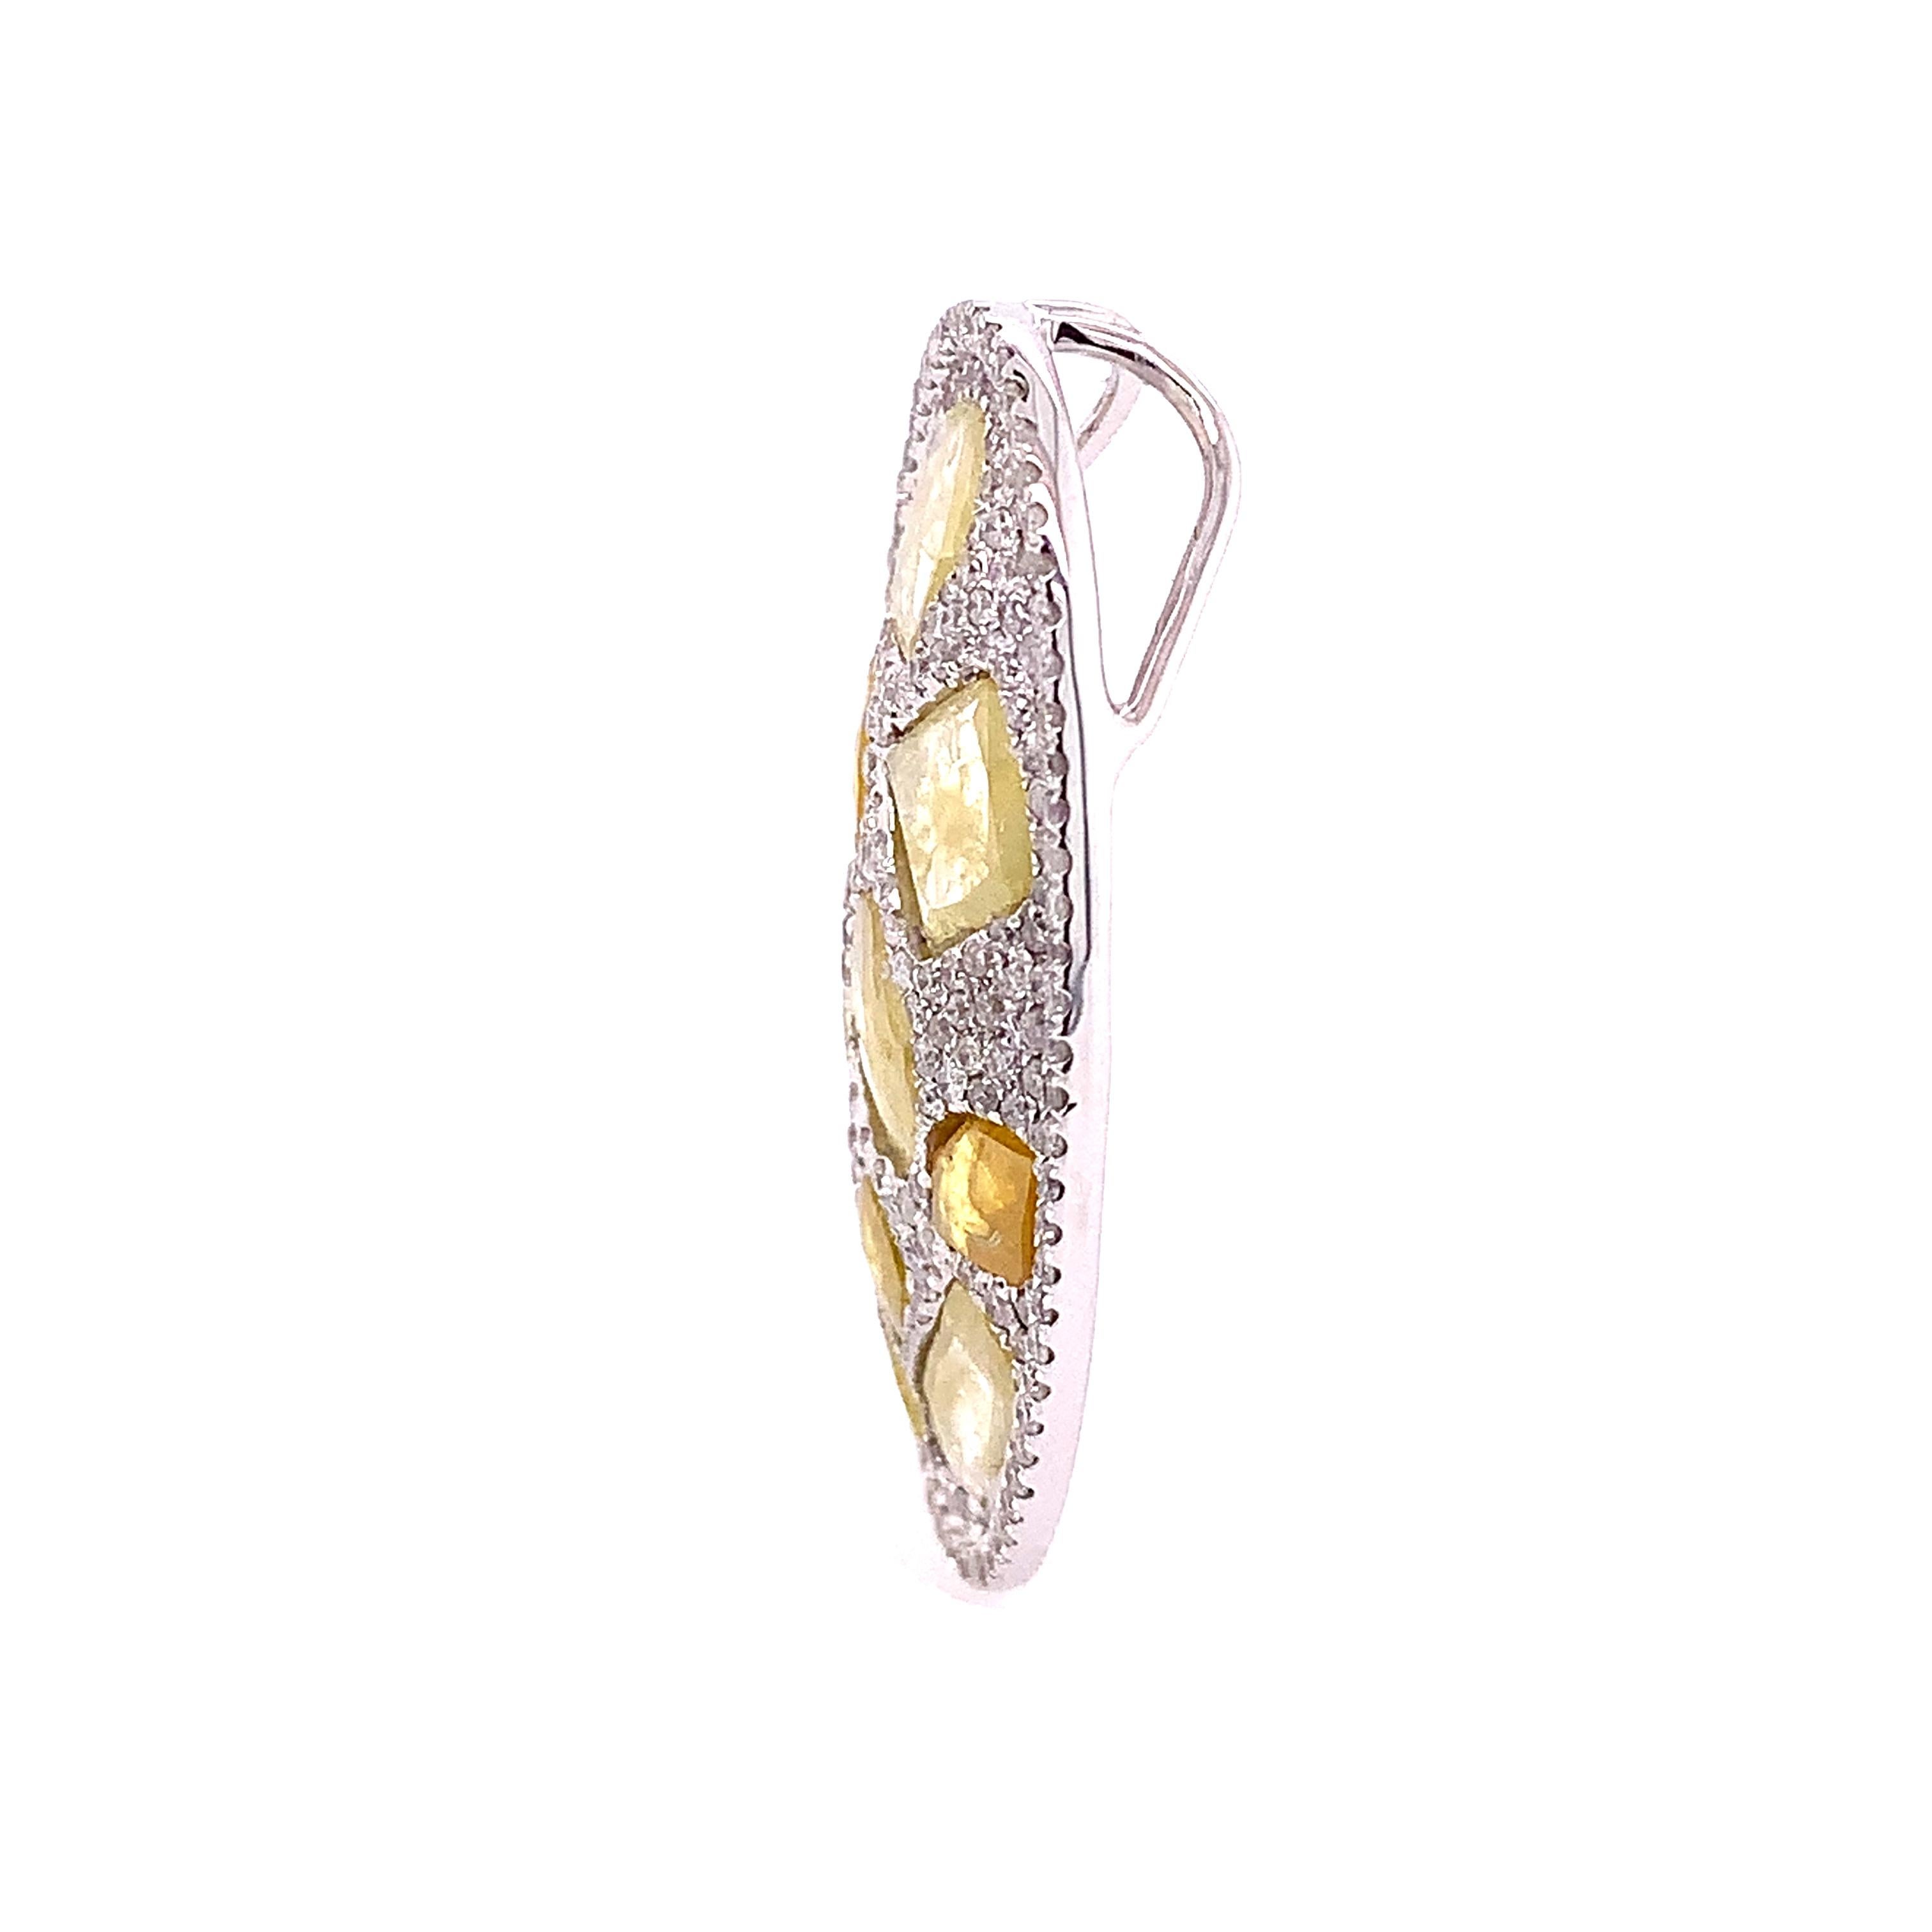 18K White and Yellow Gold
 
Pendant:
Slice Diamond: 1.83ct total weight.
Diamond: 0.75ct total weight.
All Diamonds are G-H/SI stones.

Necklace: 
Yellow Diamond beads: 36.96ct total weight.
48 inch wrap chain 
